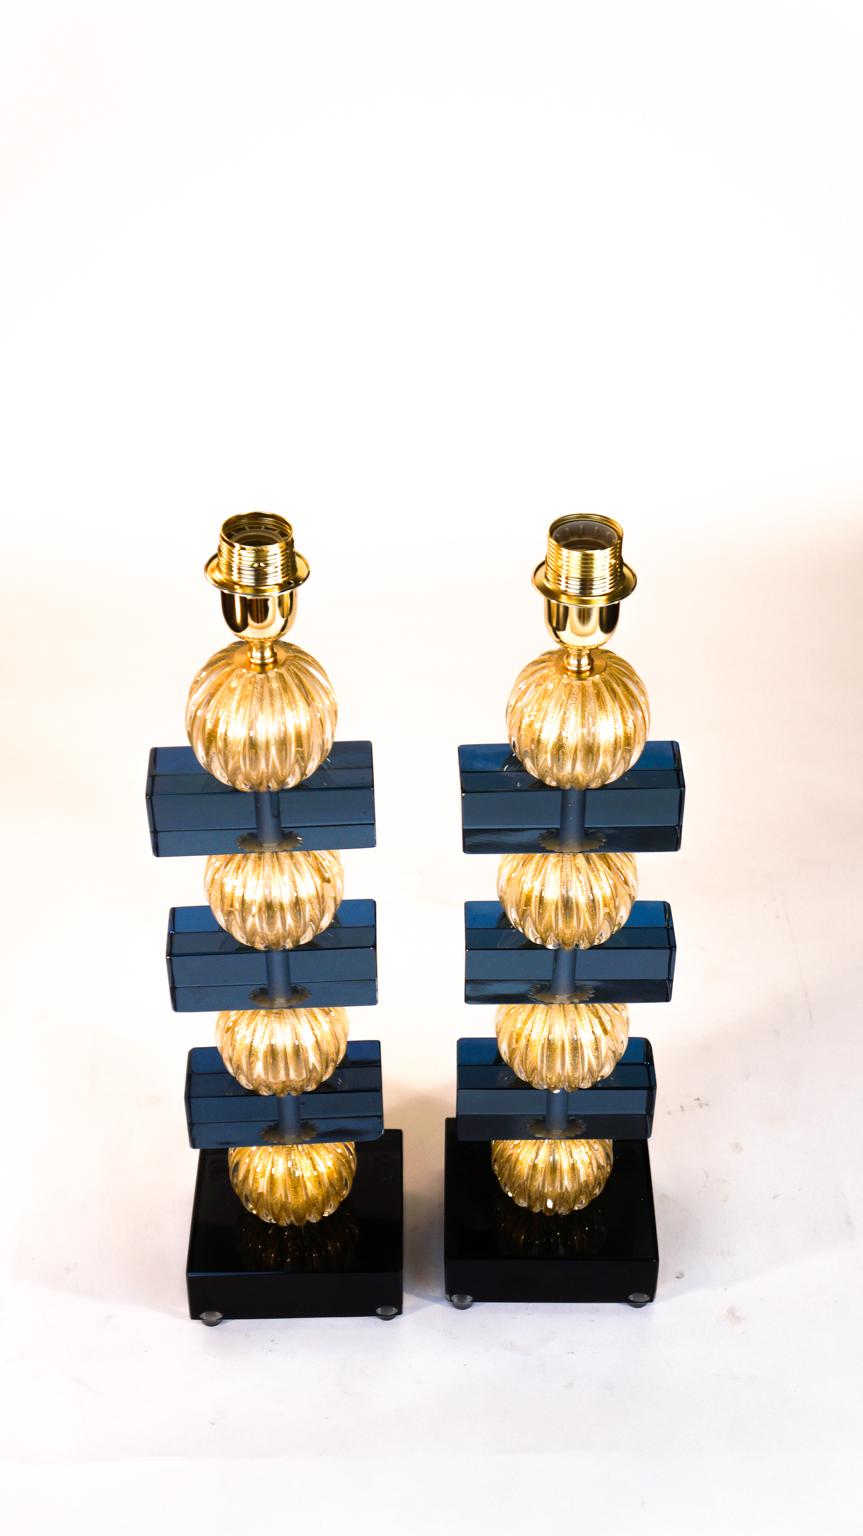 Alberto Donà Murano Pair of Blue Gold Venetian Glass Table Lamps, 1980s For Sale 13